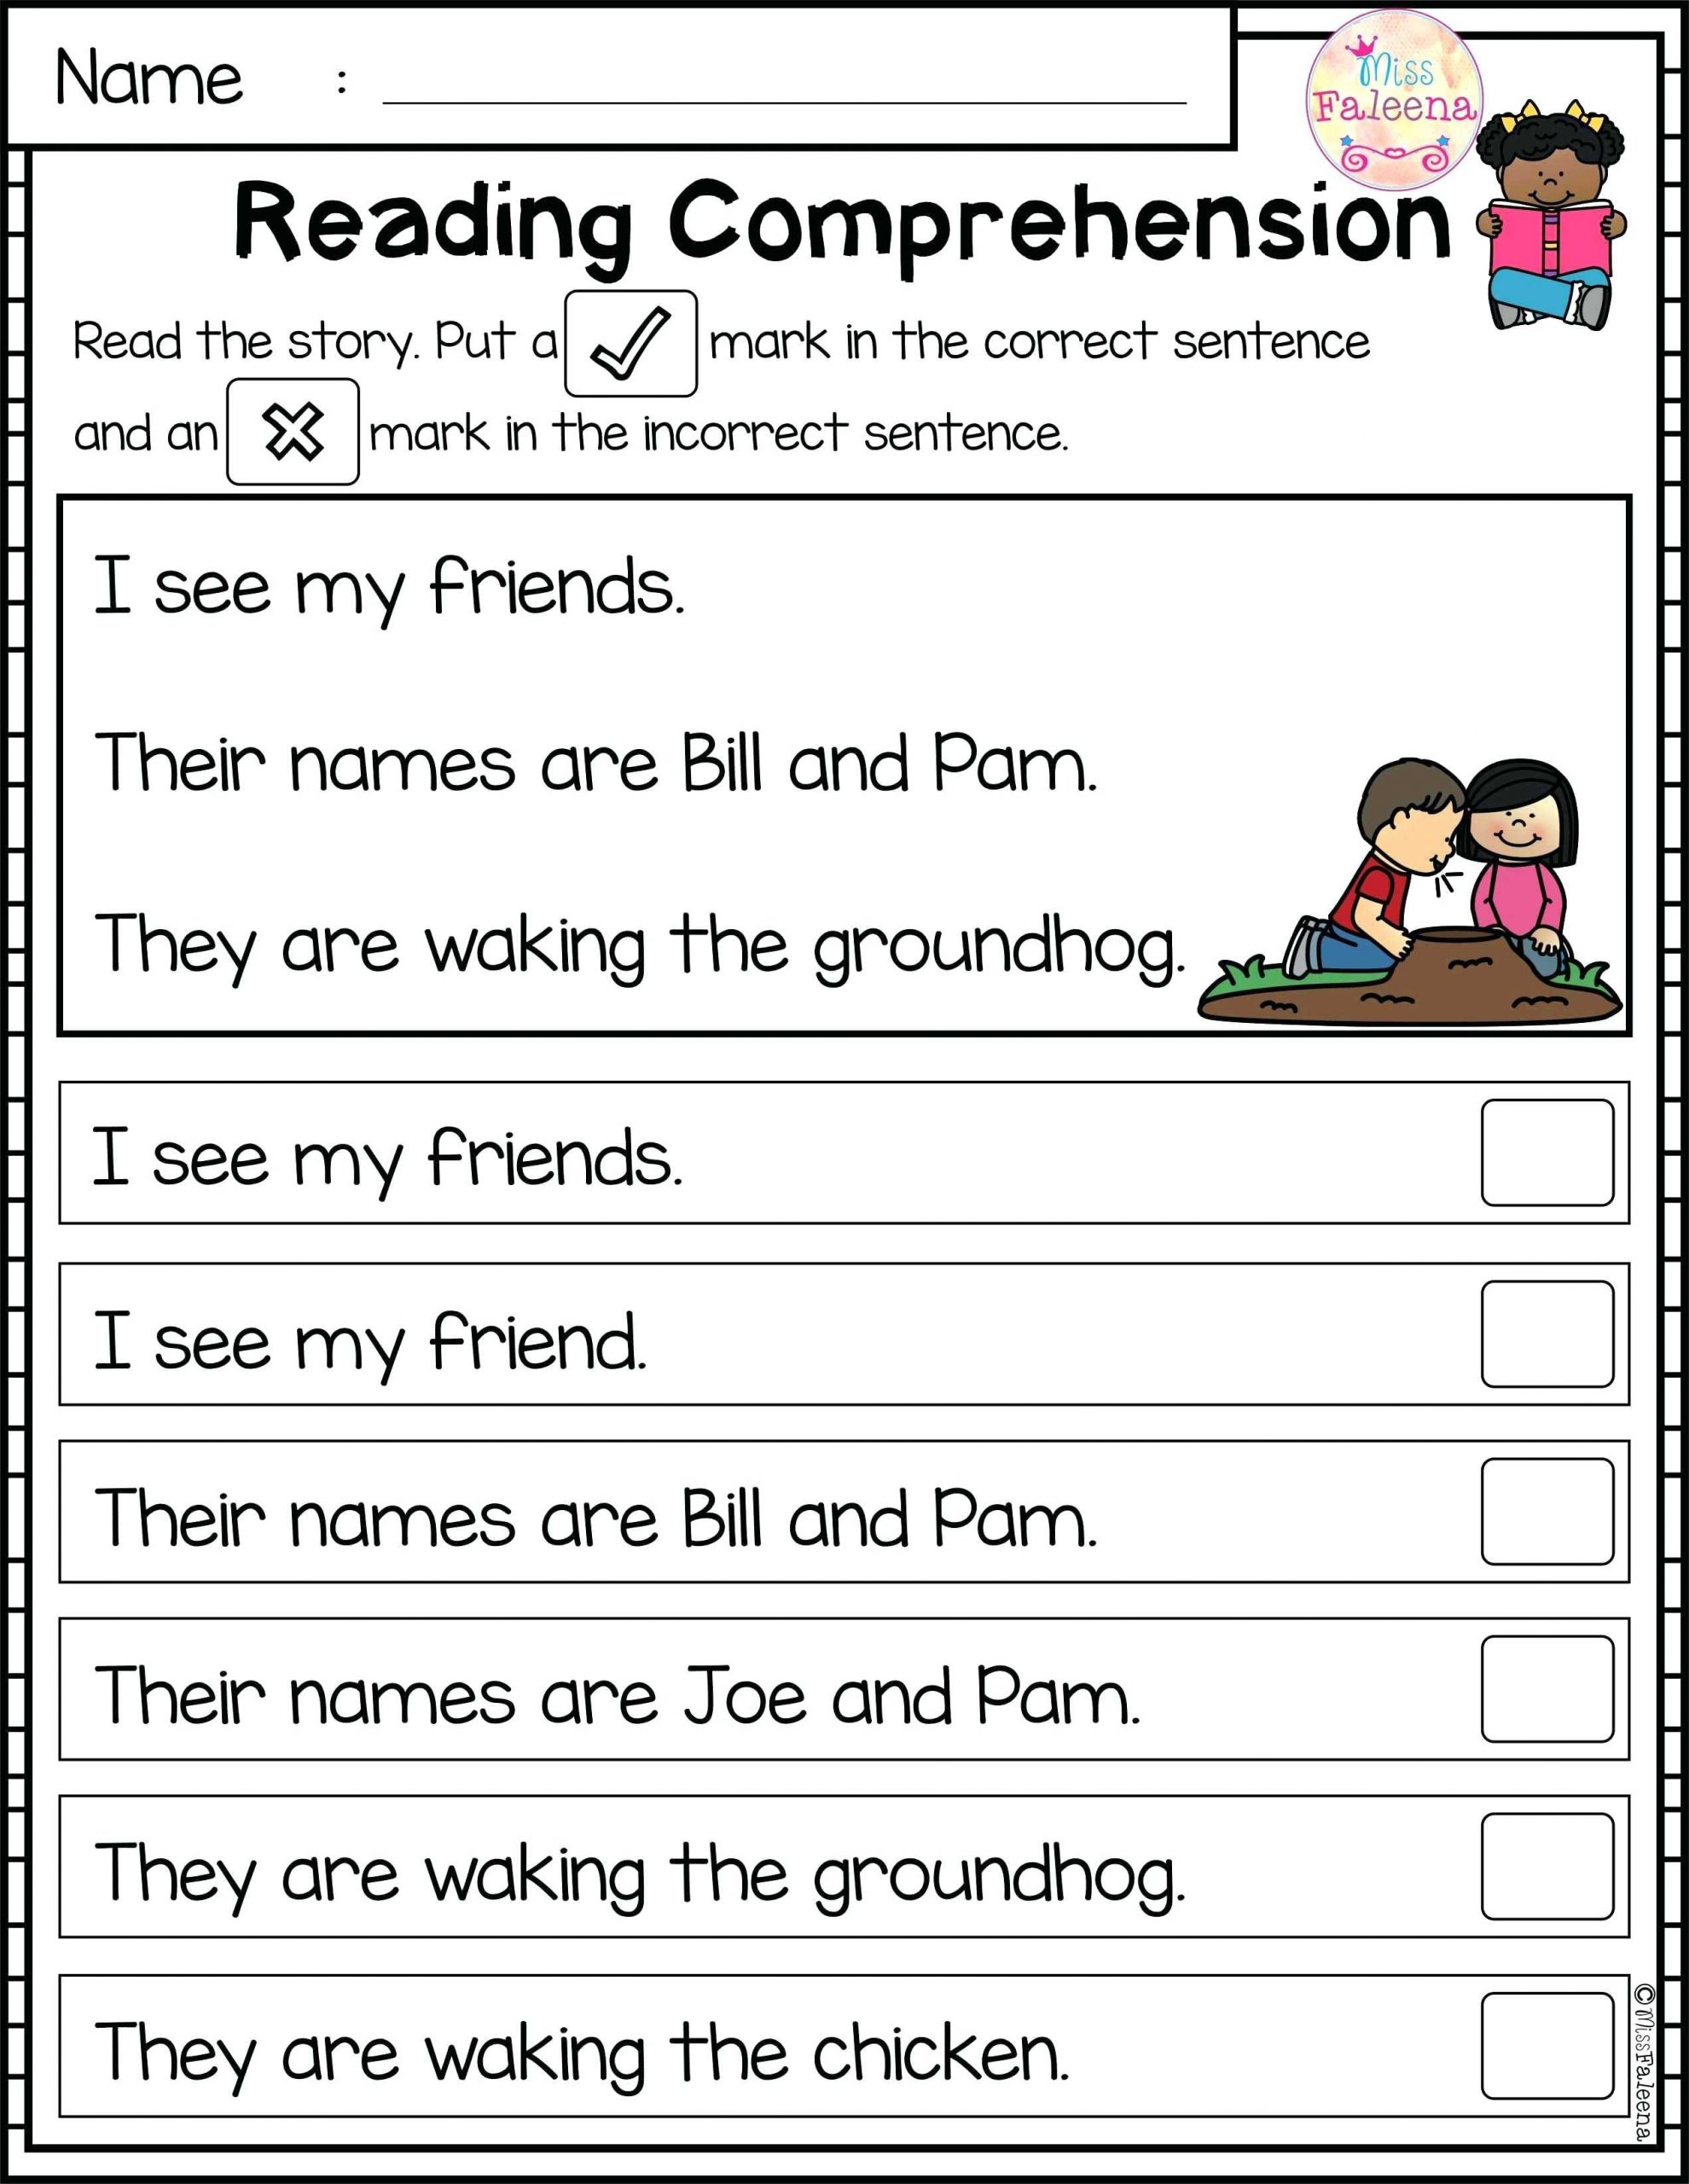 K5 Adds Phonics Vowel and Consonant Blend Words Flashcards